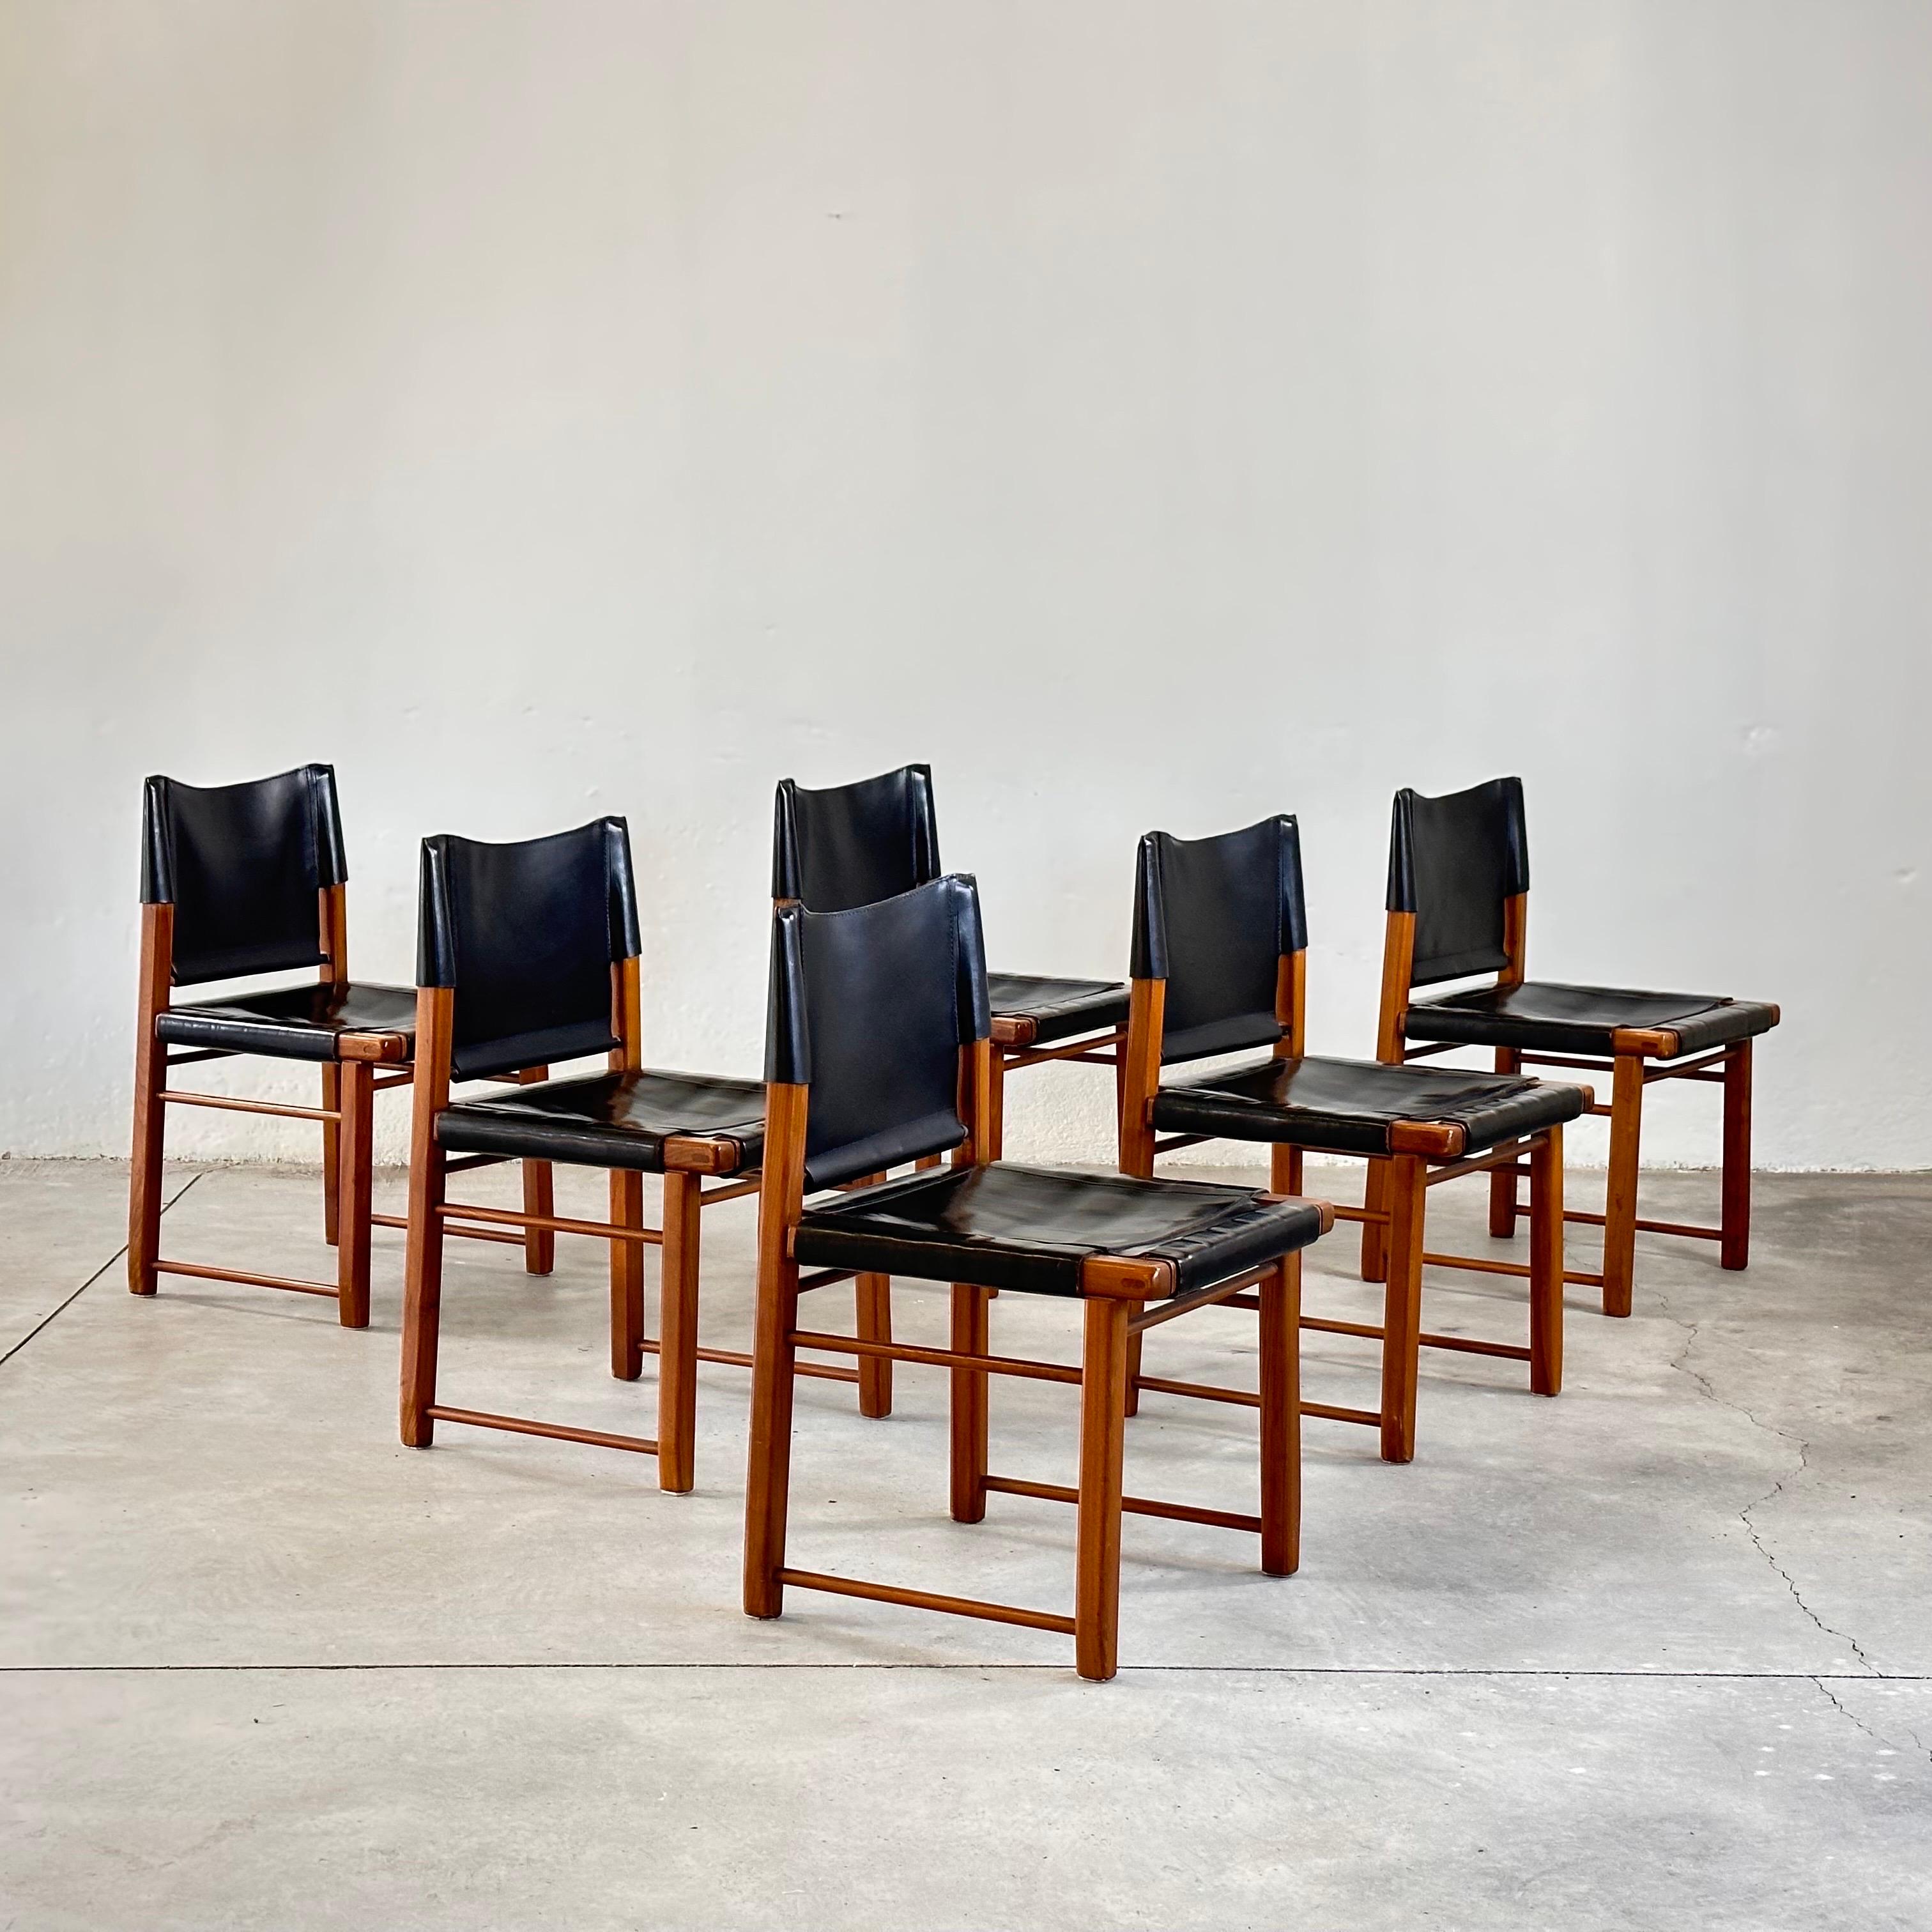 Chic Italian Elegance: Set of 6 Walnut and Black Leather Dining Chairs, 1970s